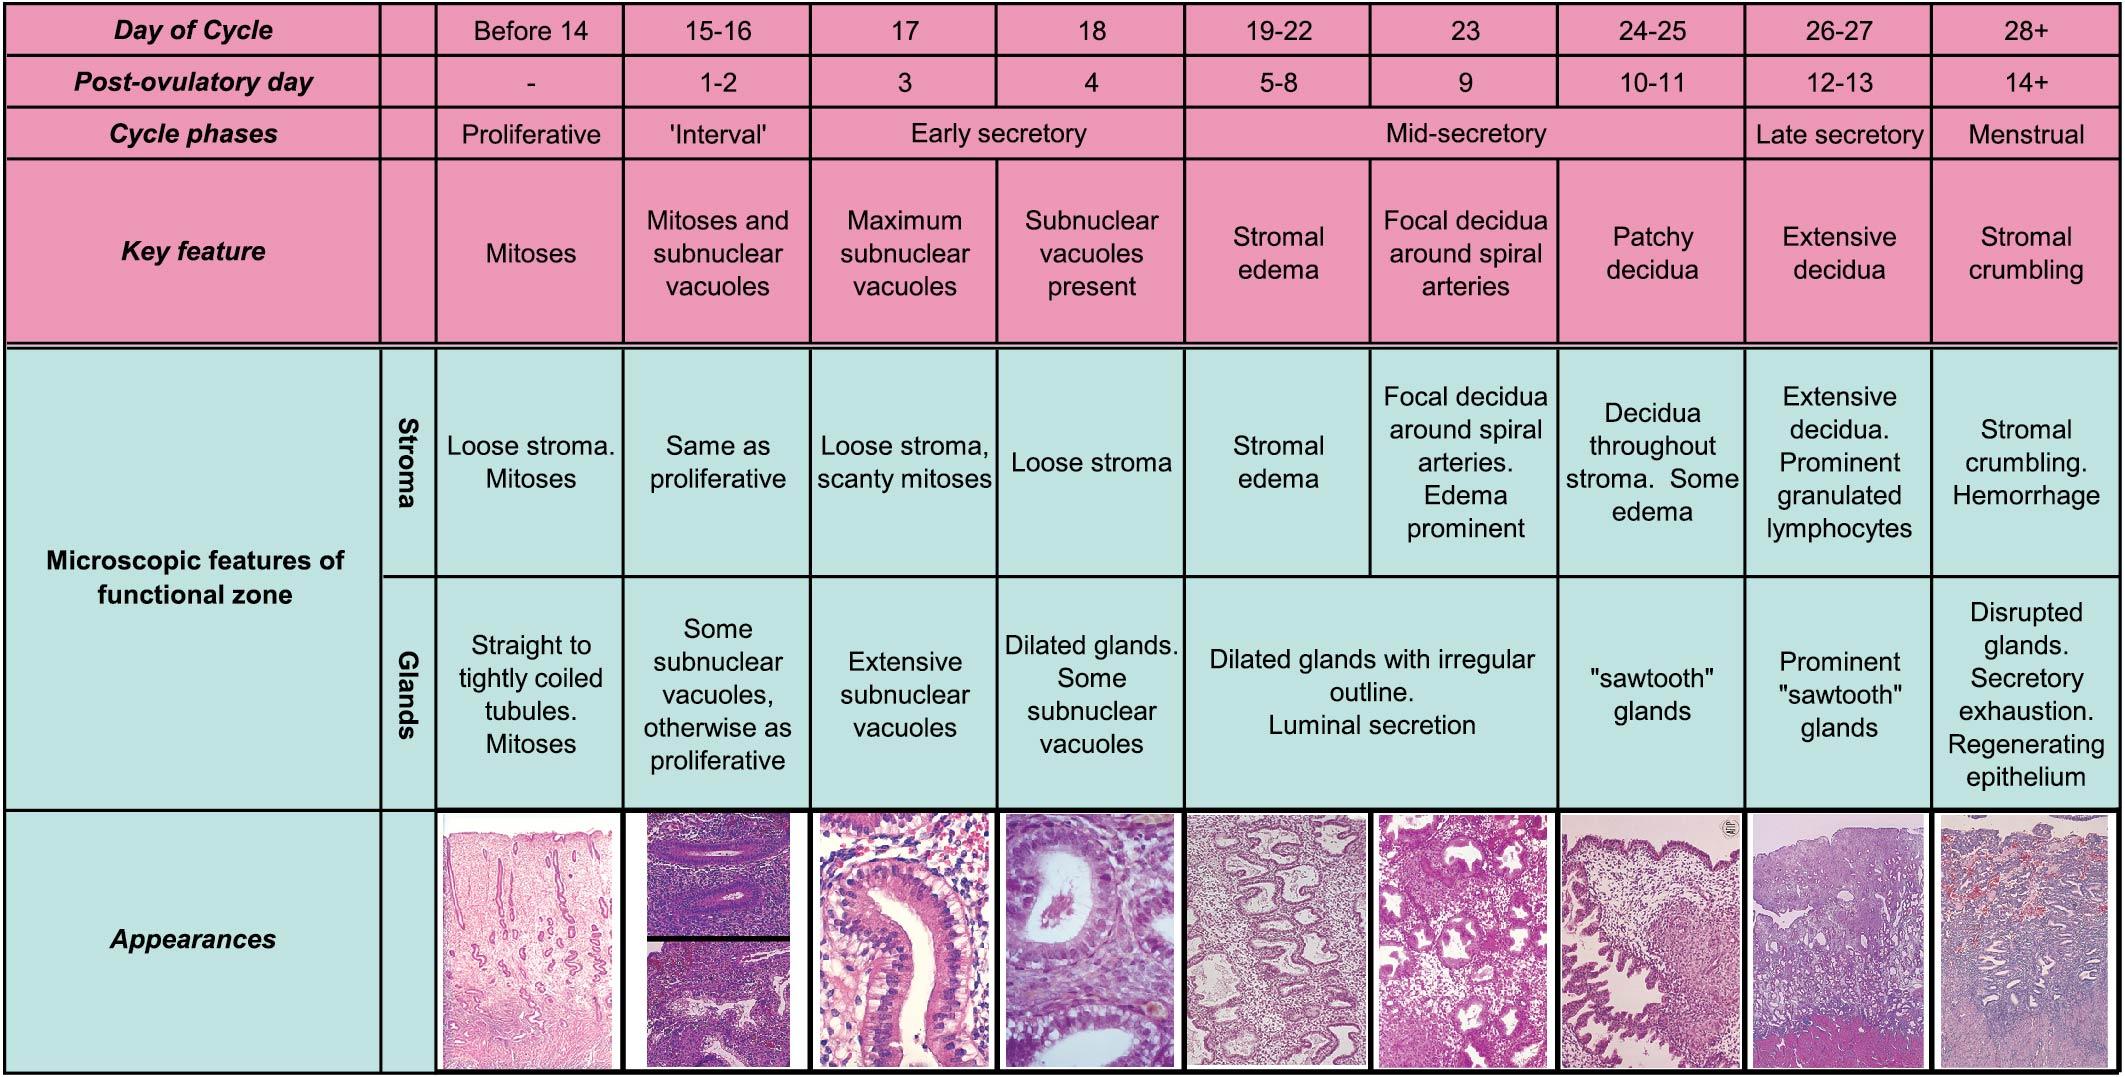 Fig. 3.17, The endometrium is responsive to the hormonal changes of the menstrual cycle. Glands and stroma change activity and thus histologic appearance throughout the cycle.